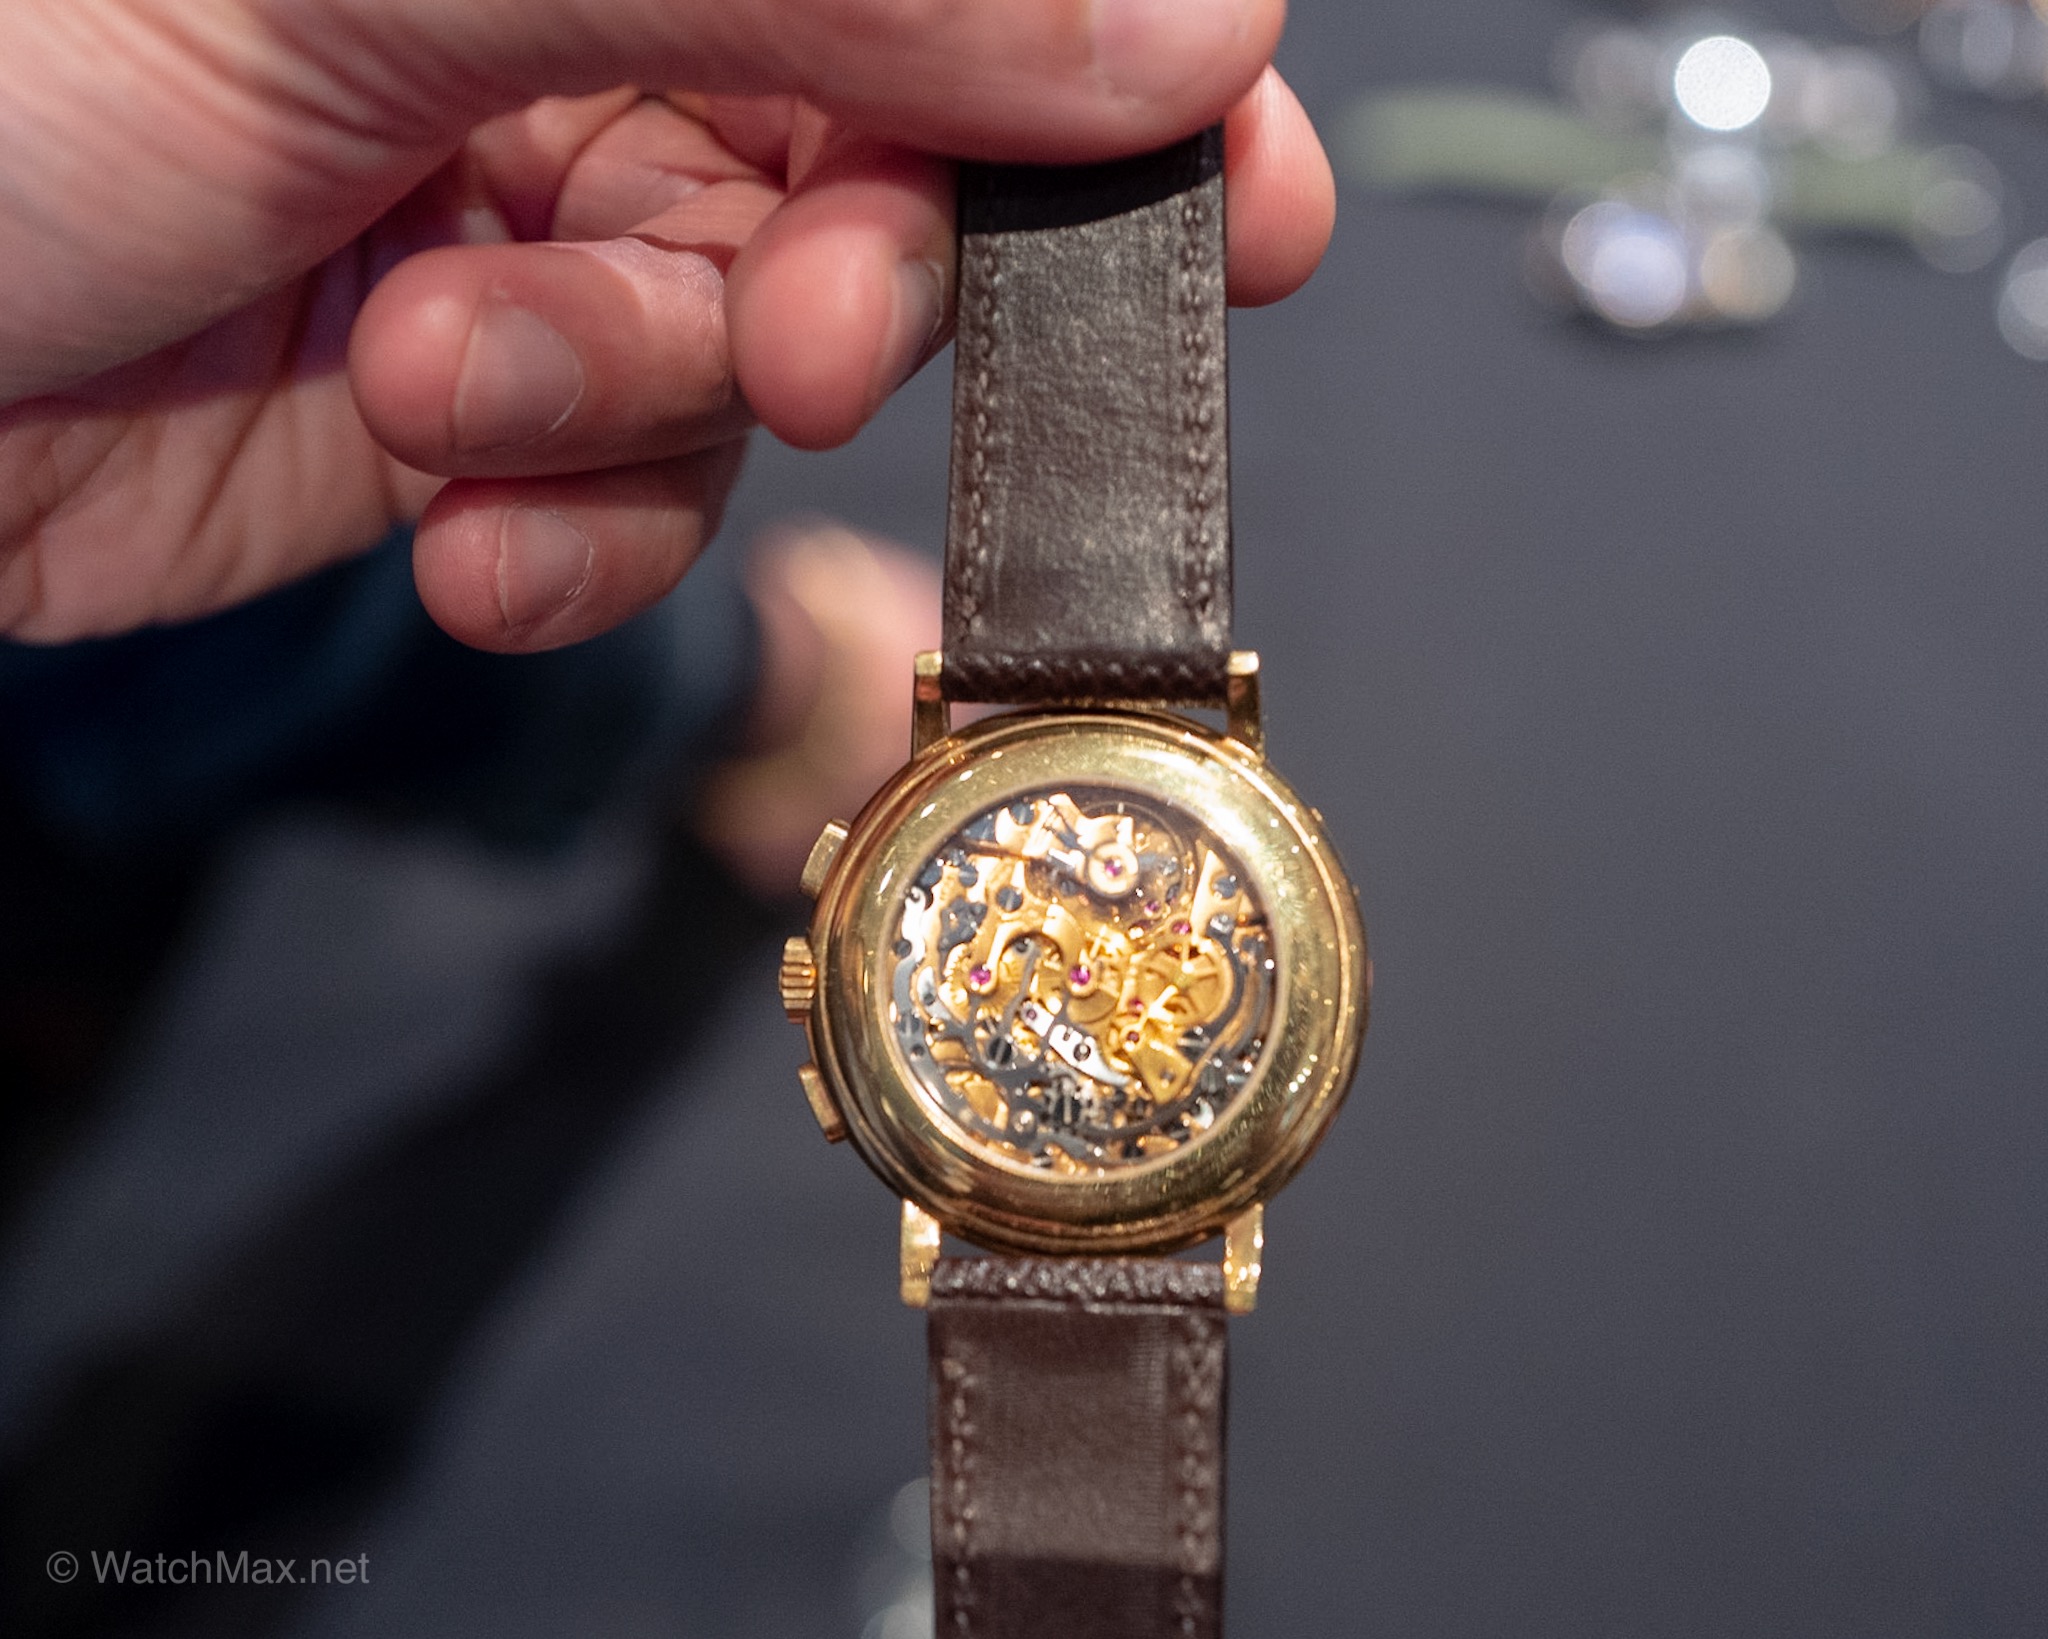 Caseback from @KleungSF's Ulysse Nardin's calendar chronograph with Lemania movement